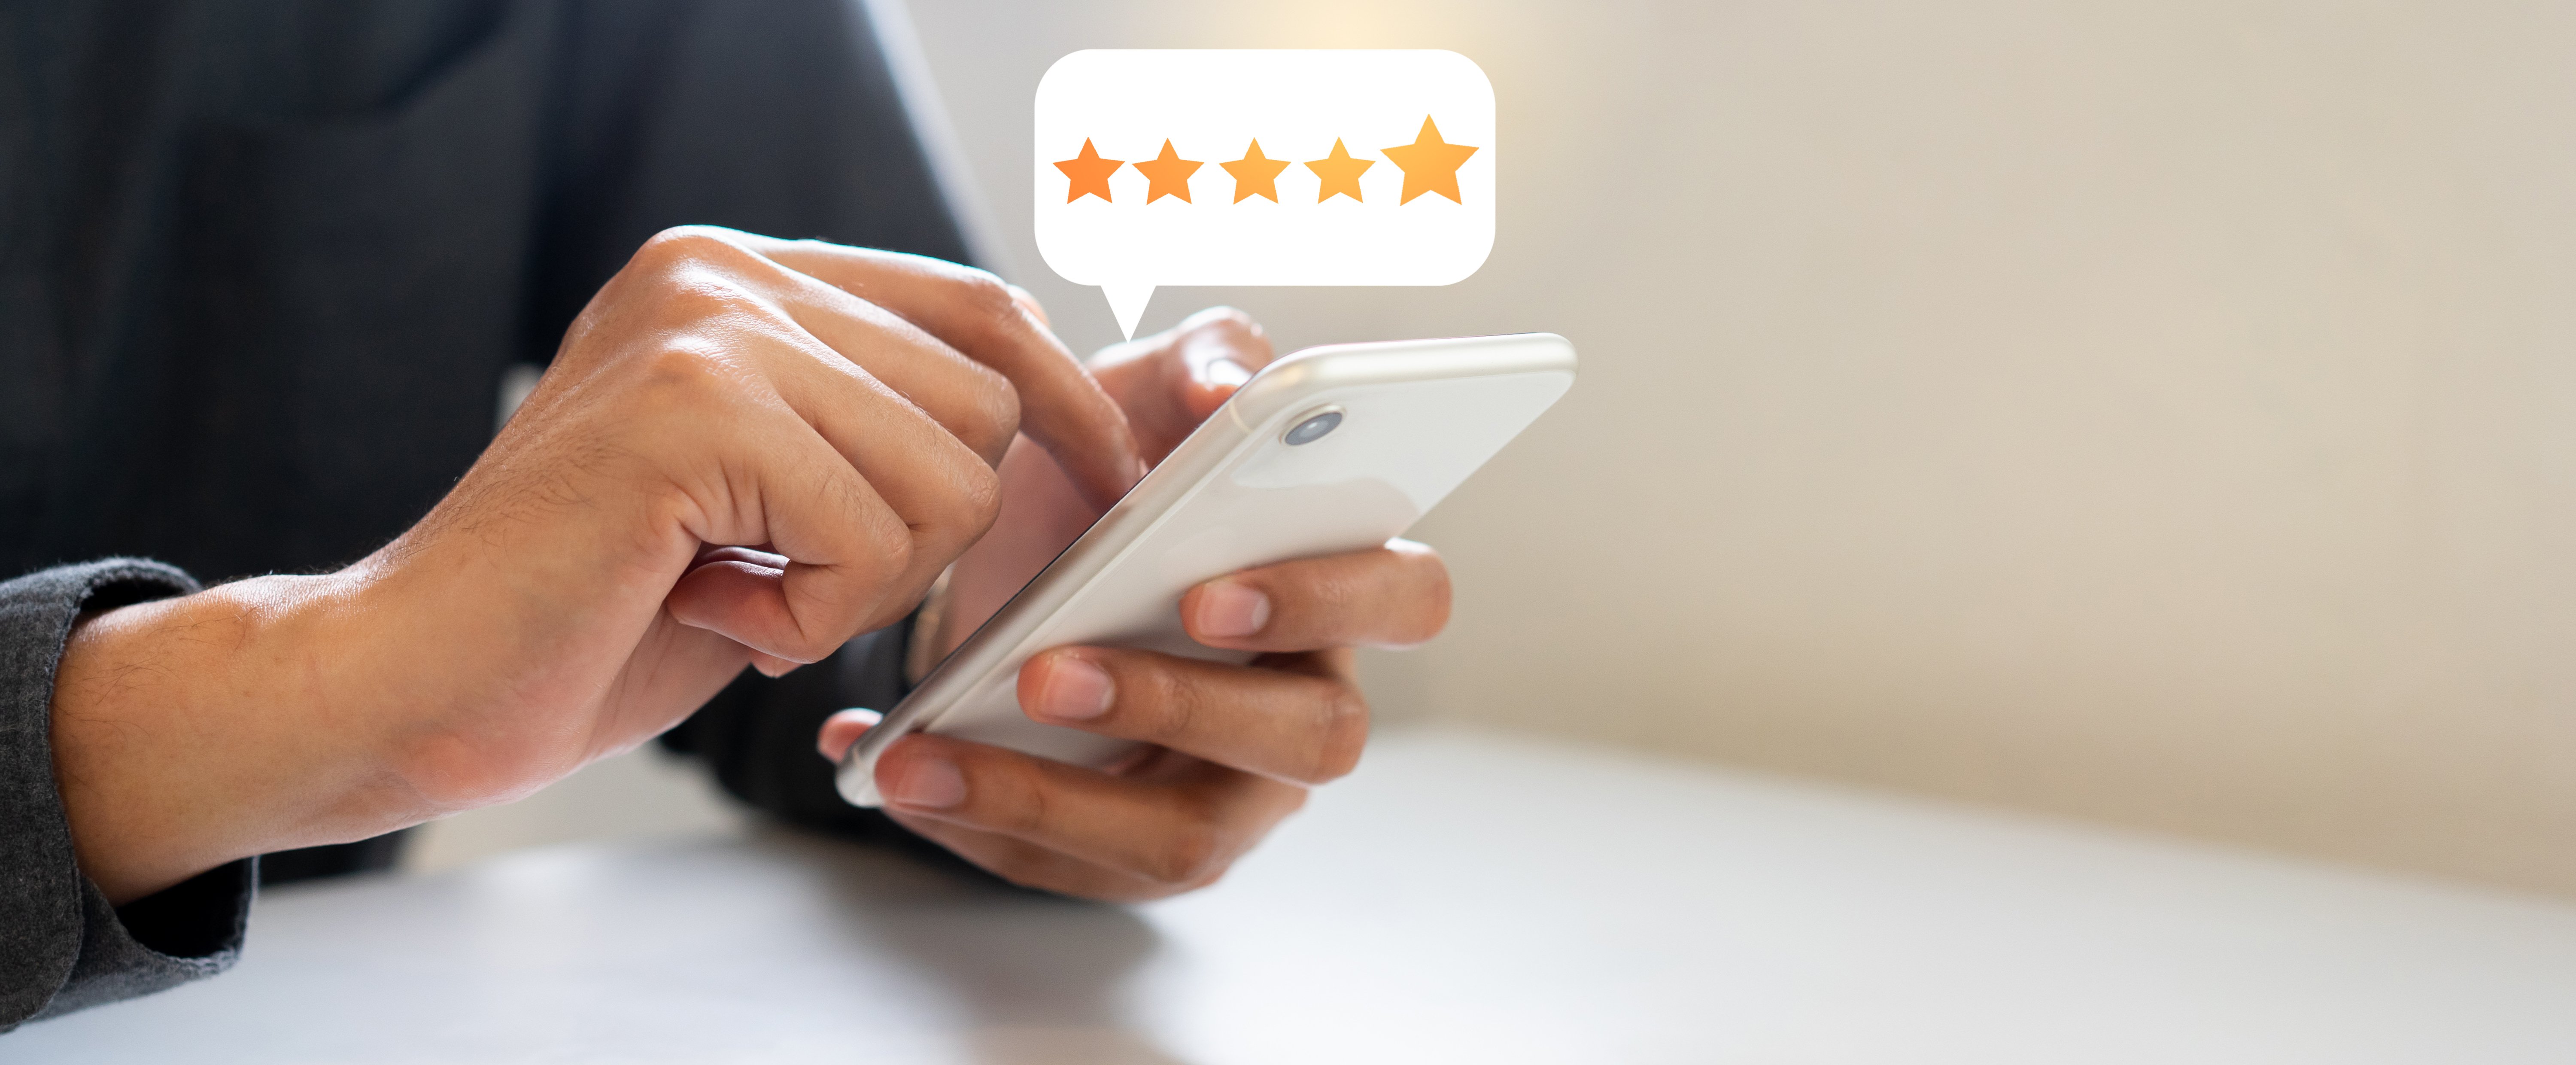  close up on customer man hand pressing on smartphone screen with five star rating feedback icon